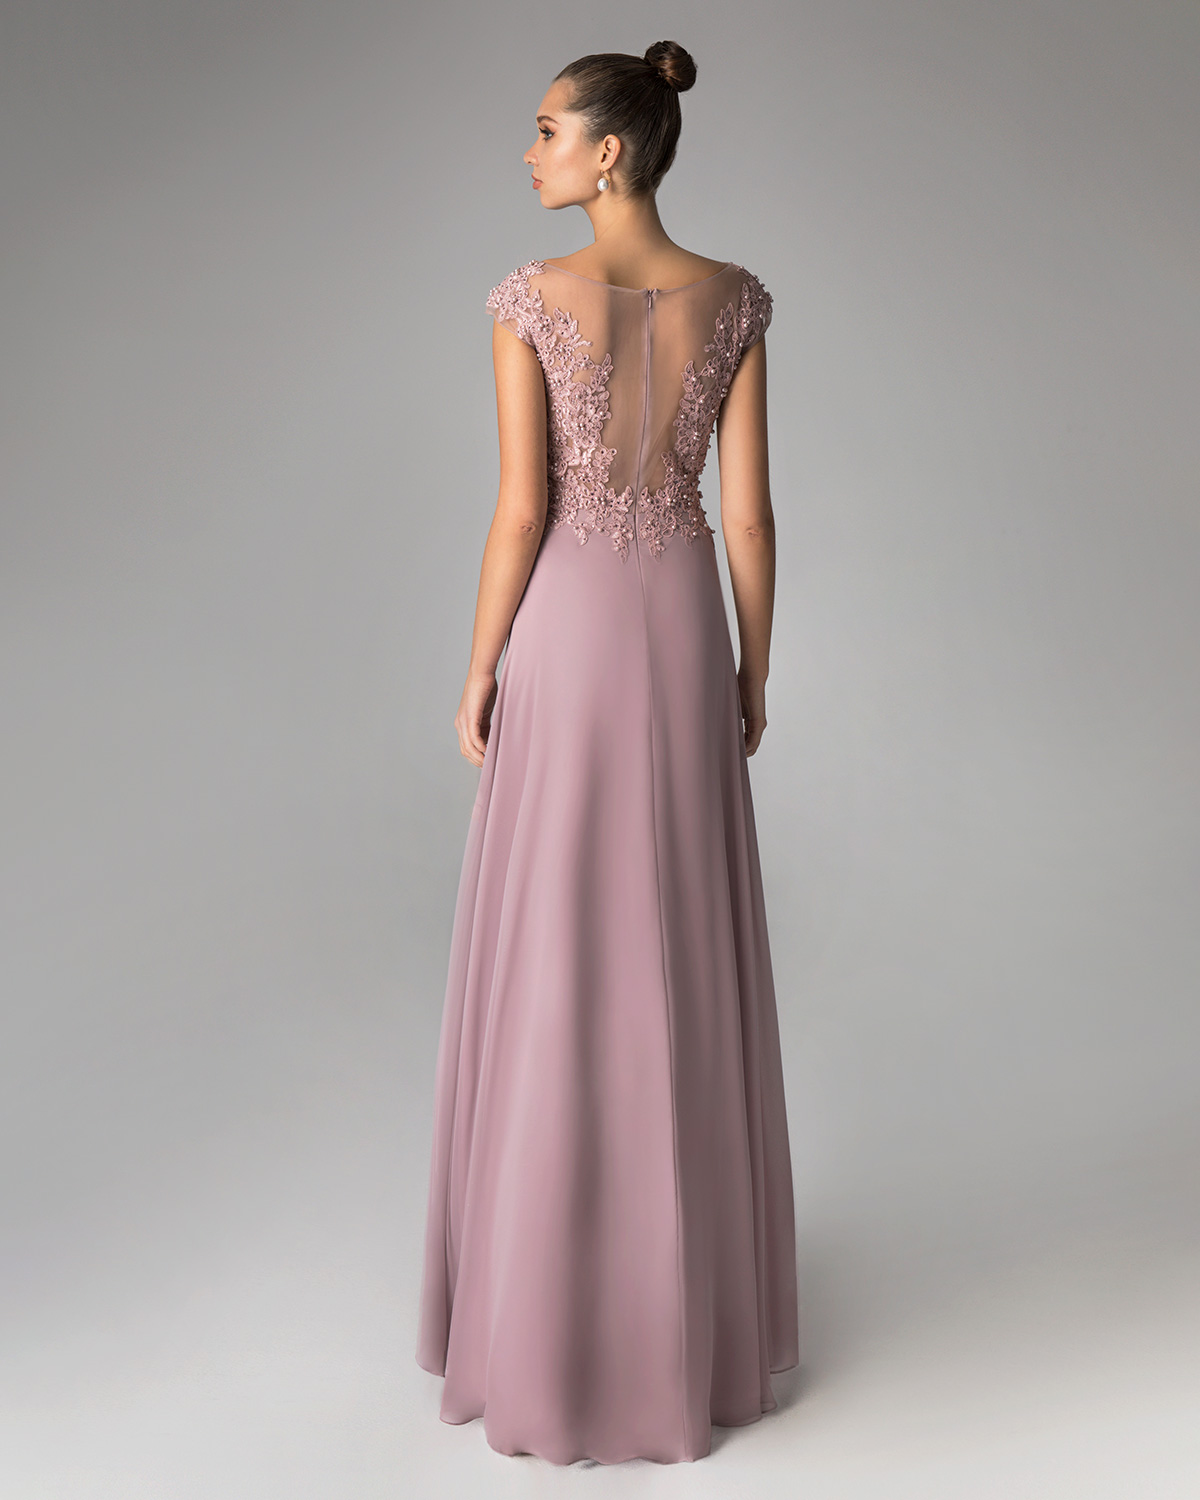 Classic Dresses / Long evening dress with lace top and chiffon skirt